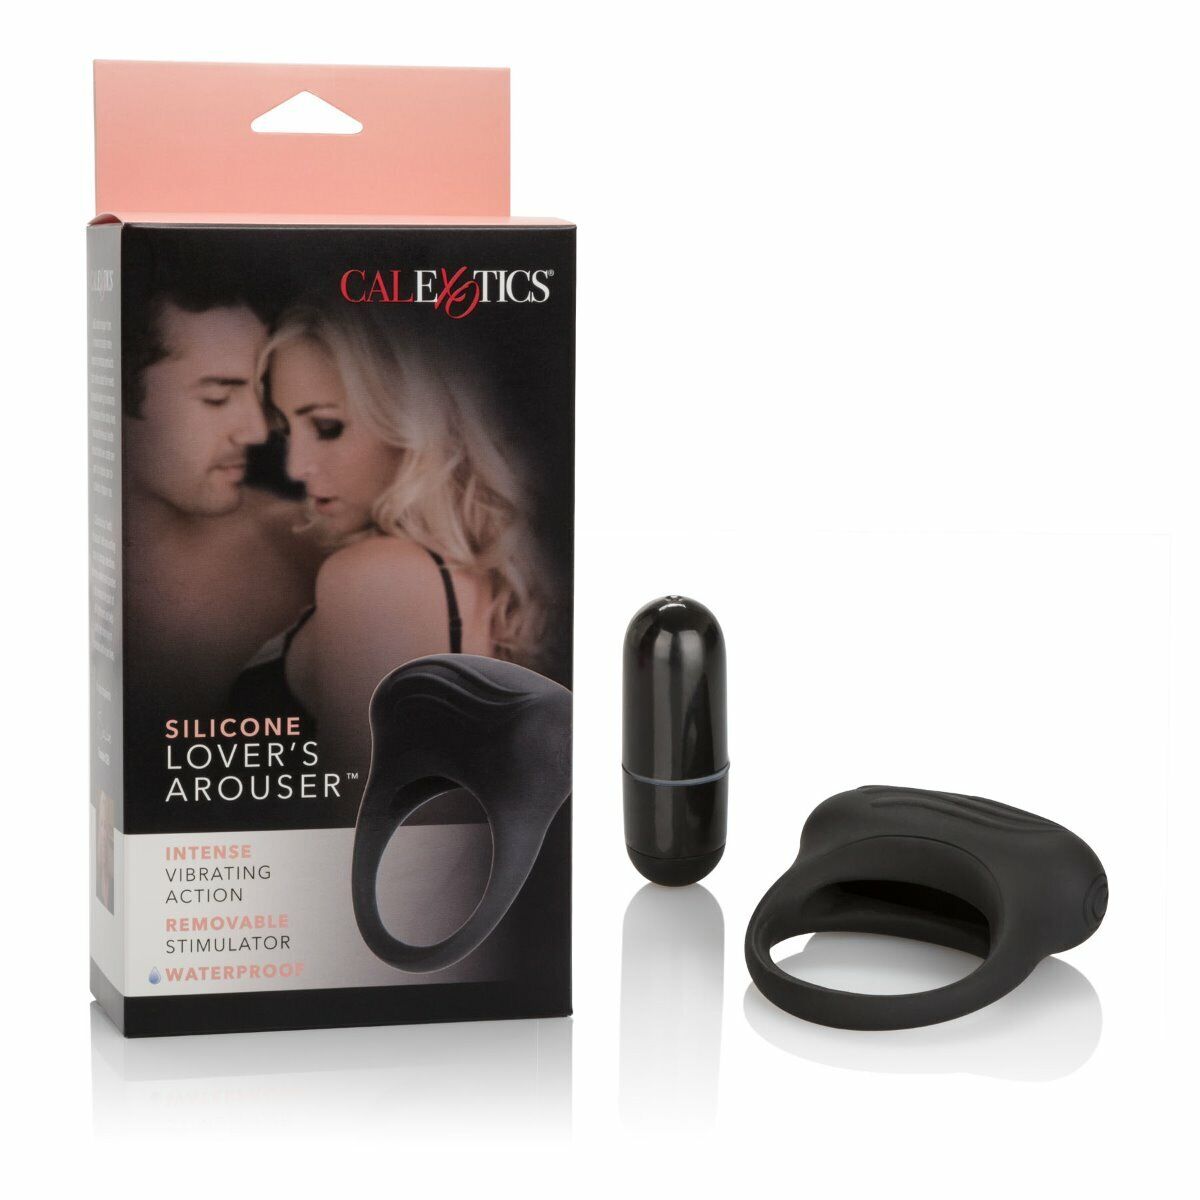 Waterproof Silicone Lover's Arouser Vibrating Penis Cock Ring Enhancer